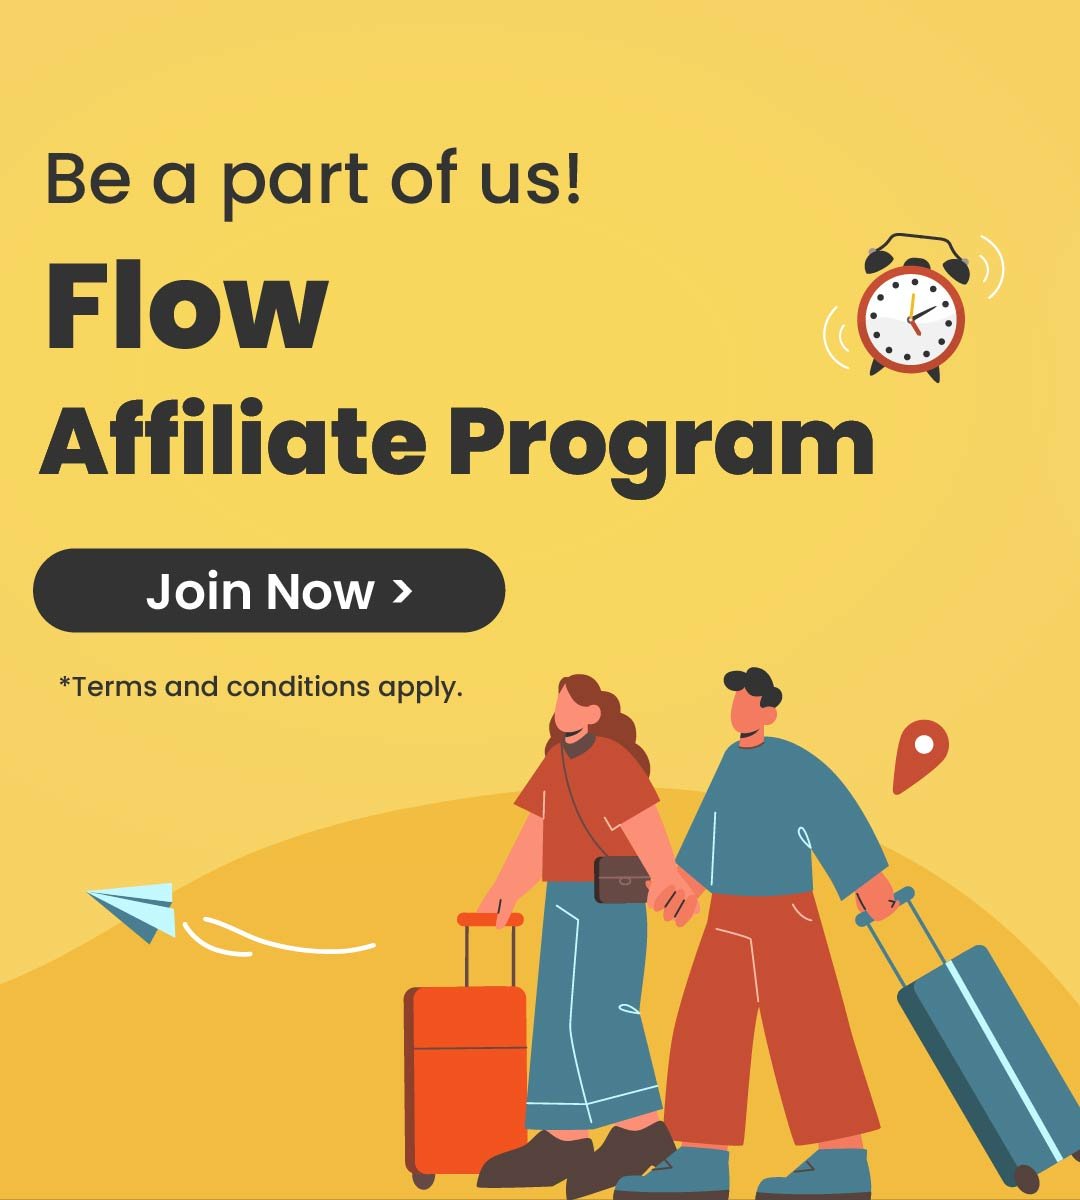 Join Flow's Affiliate Program today and earn up to 5% commission!